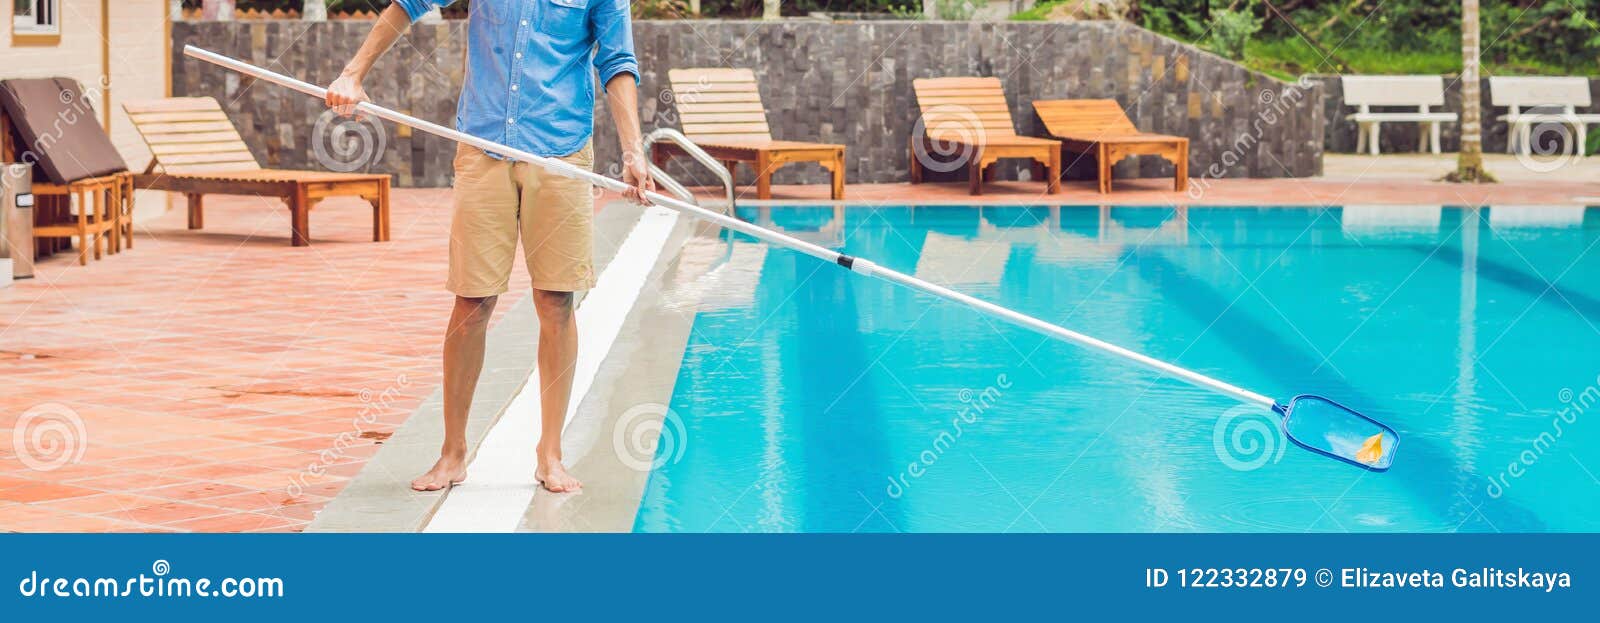 cleaner of the swimming pool . man in a blue shirt with cleaning equipment for swimming pools, sunny banner, long format